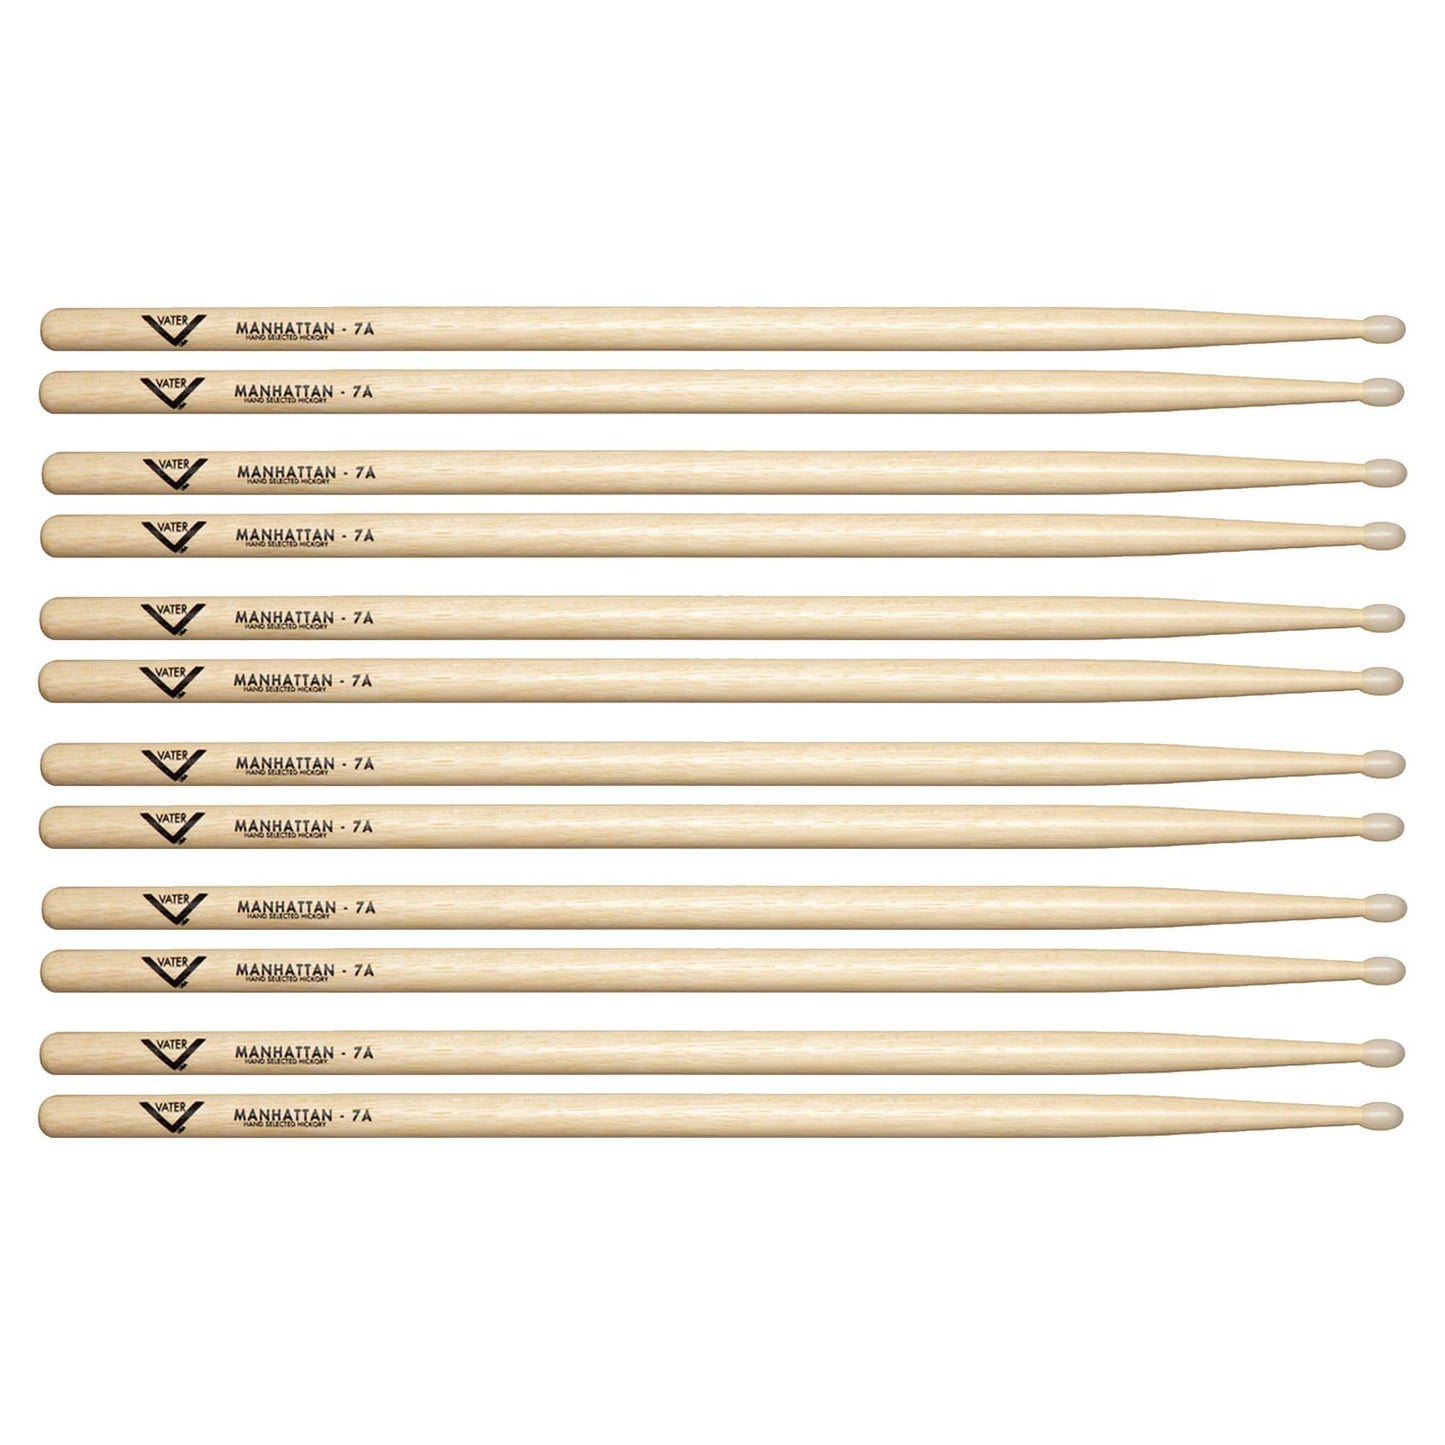 Vater Hickory Manhattan 7A Nylon Tip Drum Sticks (6 Pair Bundle) Drums and Percussion / Parts and Accessories / Drum Sticks and Mallets